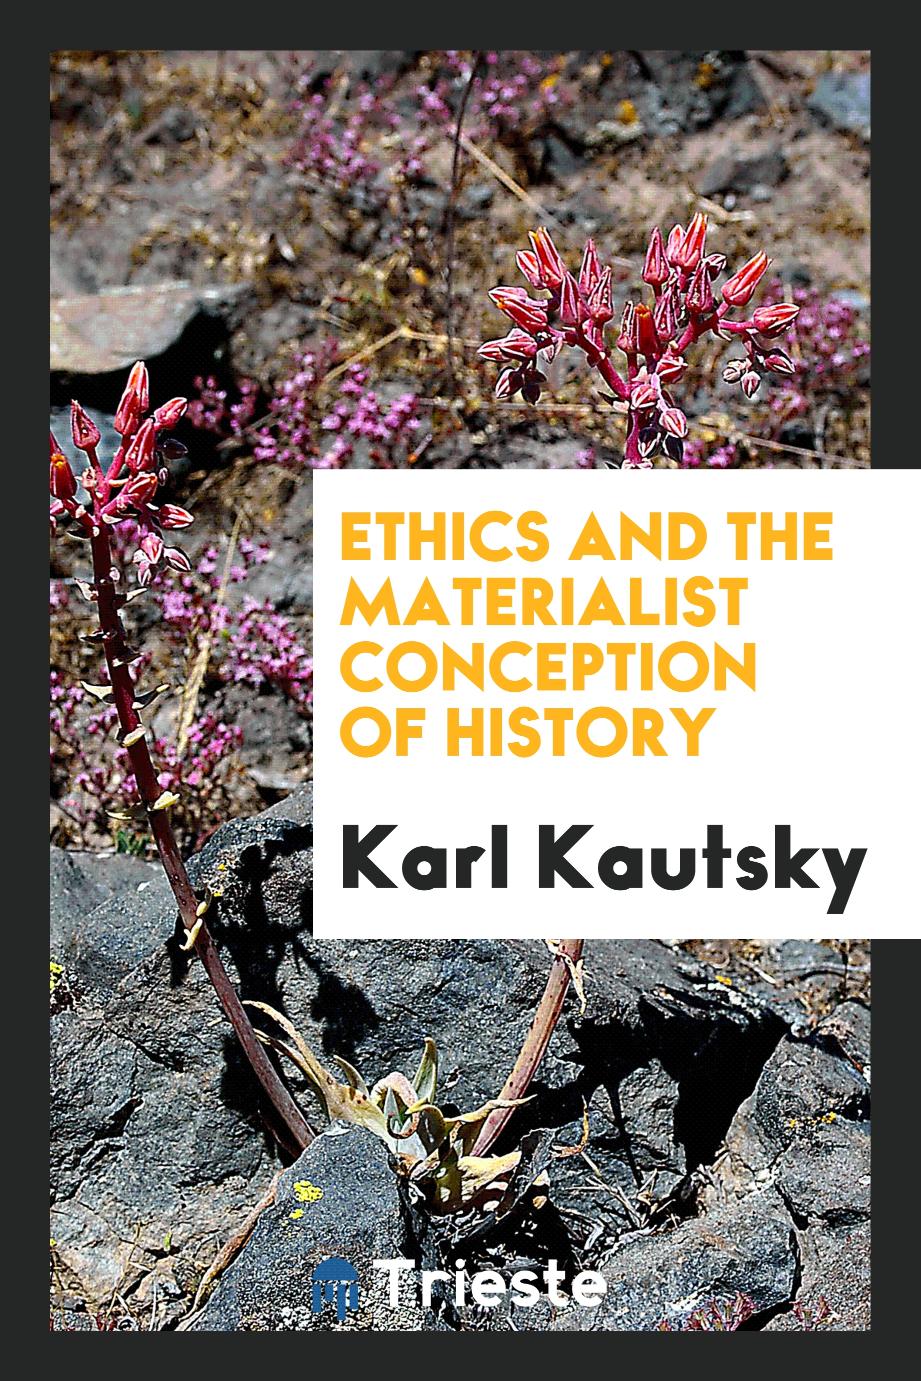 Ethics and the materialist conception of history